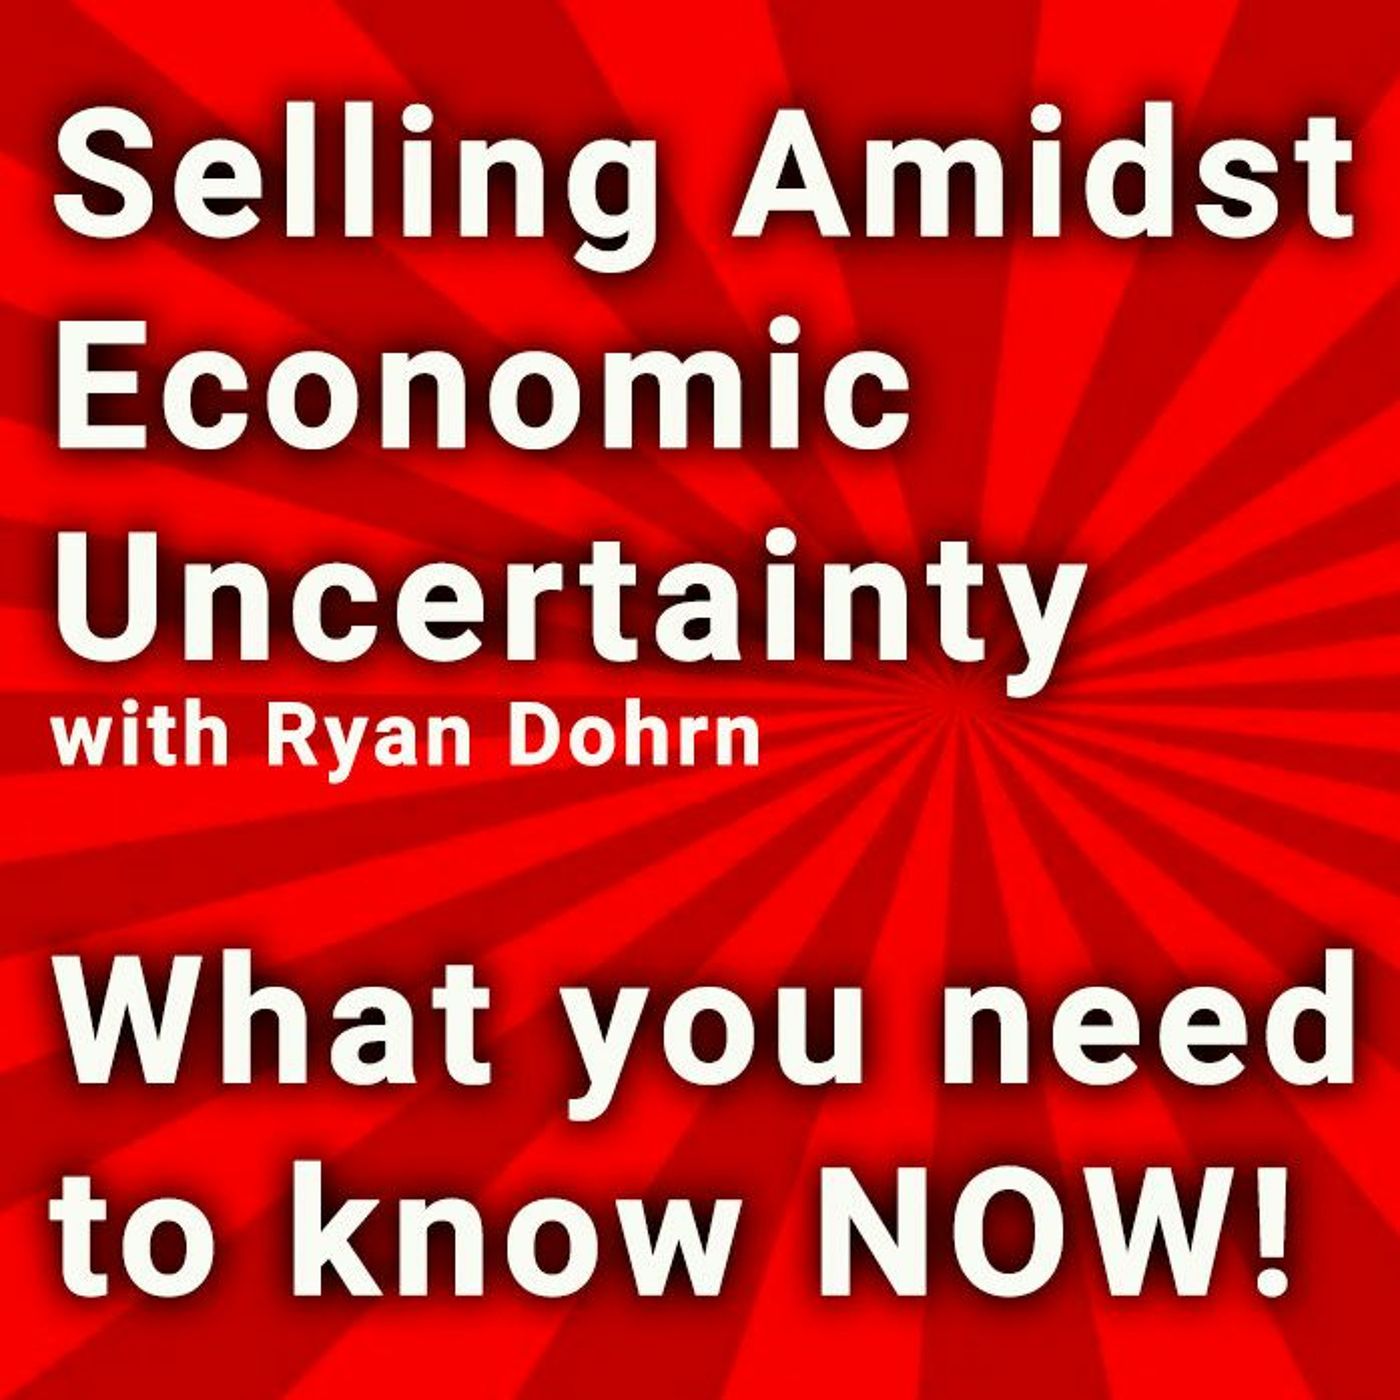 Selling Amidst Economic Uncertainty - Sales training with Ryan Dohrn